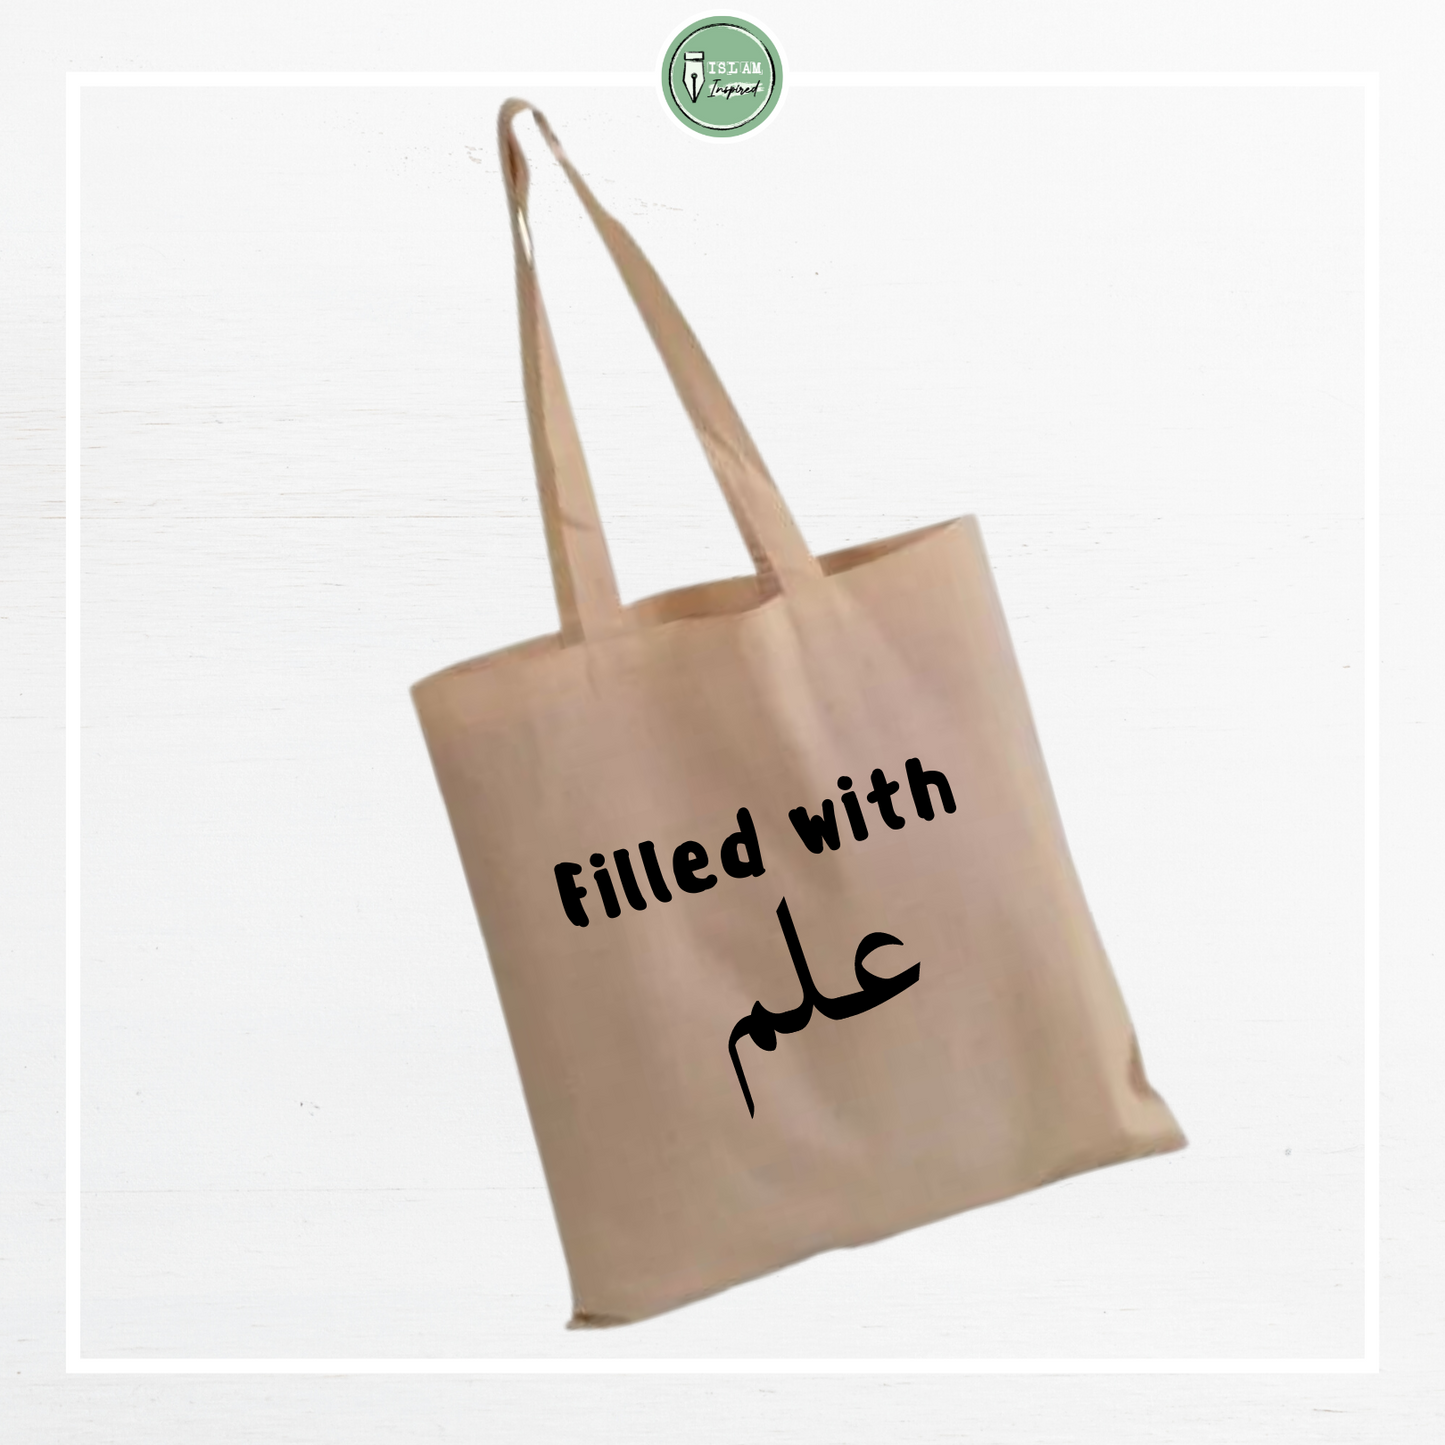 Totebag 'filled with ilm'